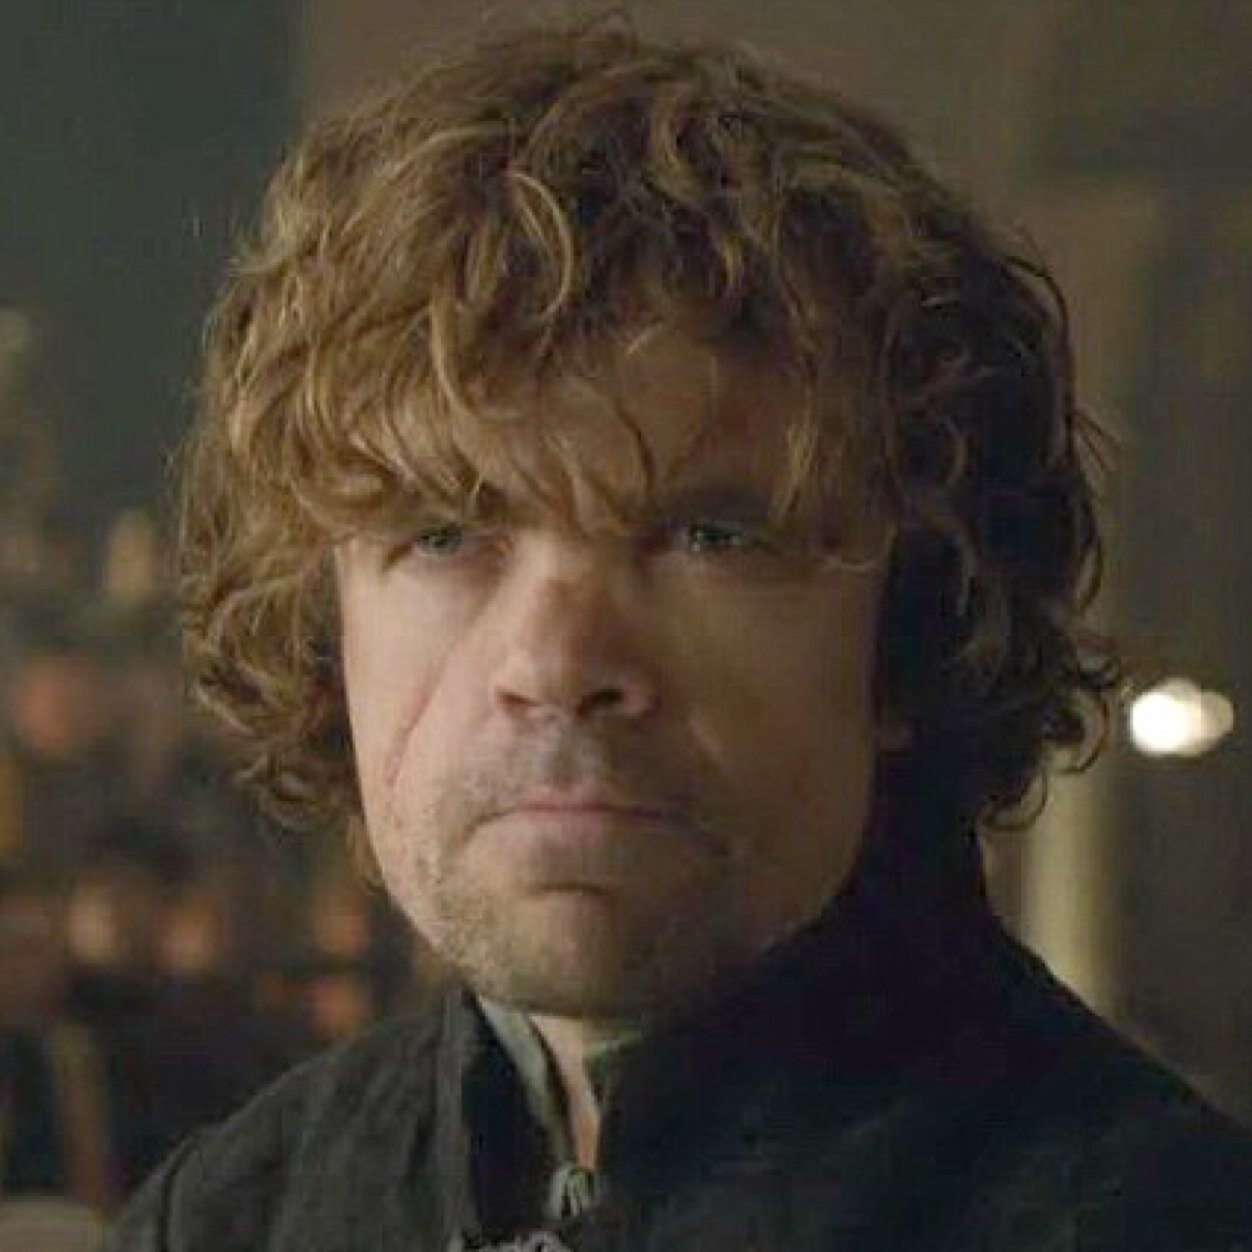 Imp, Halfman, brother, shameful son. I have been called them all. You, however, may call me Tyrion. (I will not spoil)